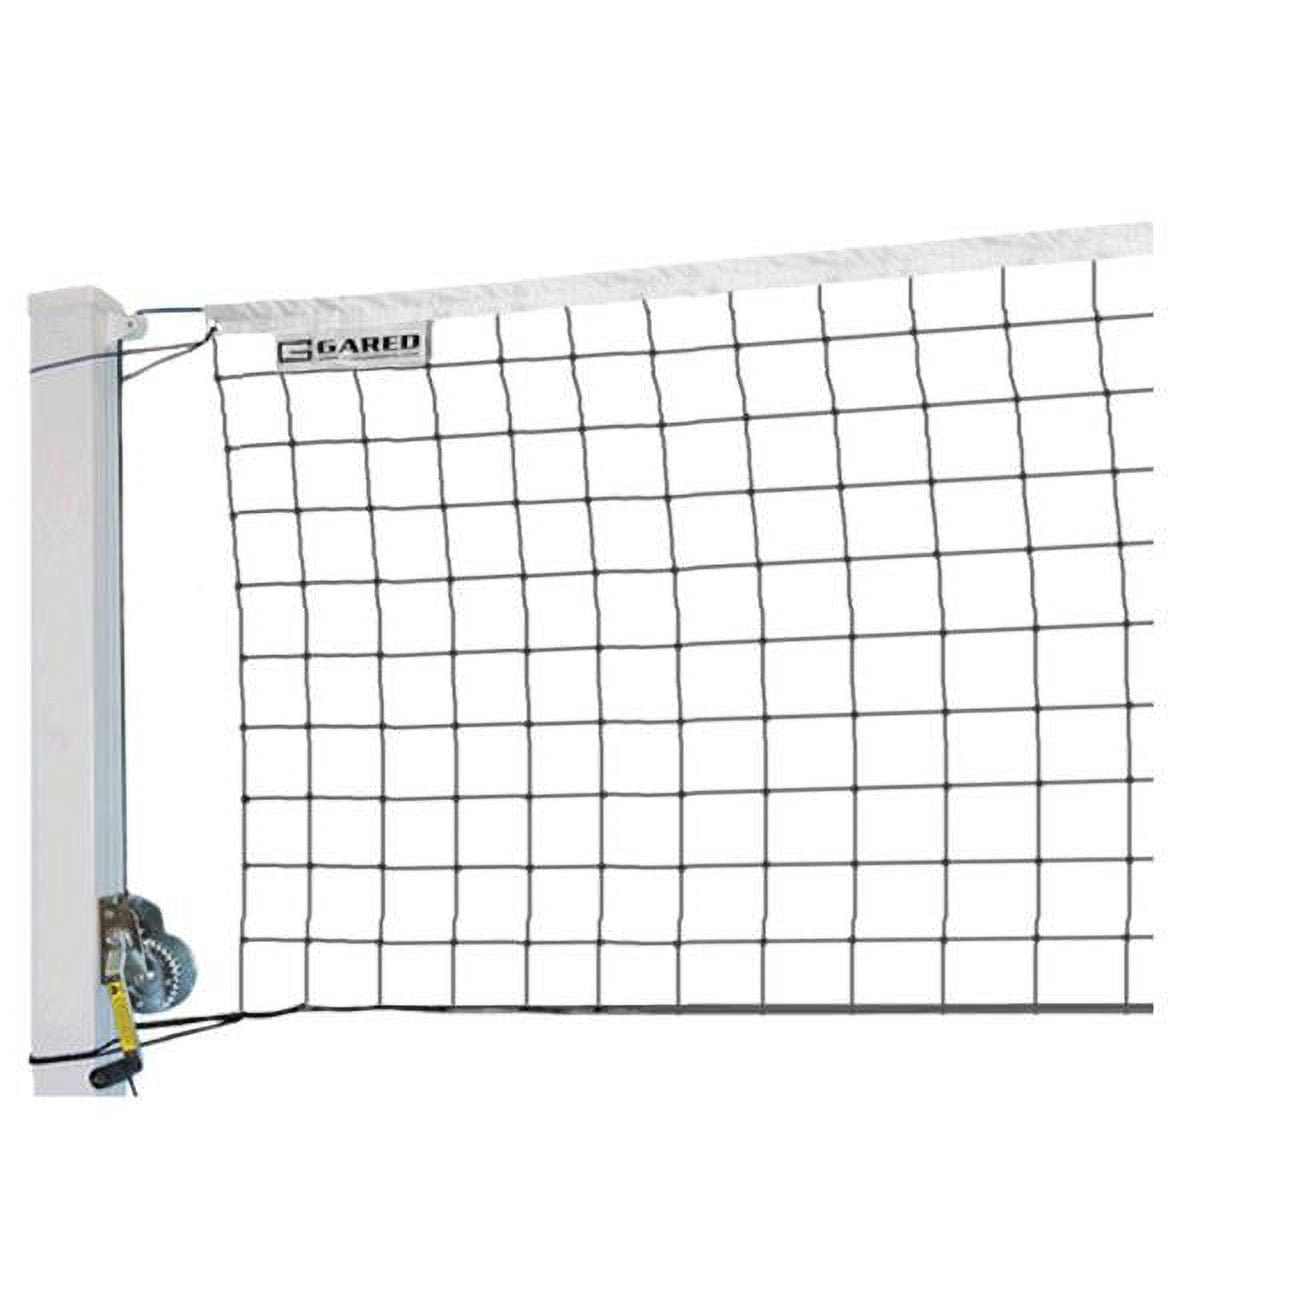 Gared Sports 32 ft. x 3 ft. 2 MM Poly Outdoor Volleyball Net - for use ...